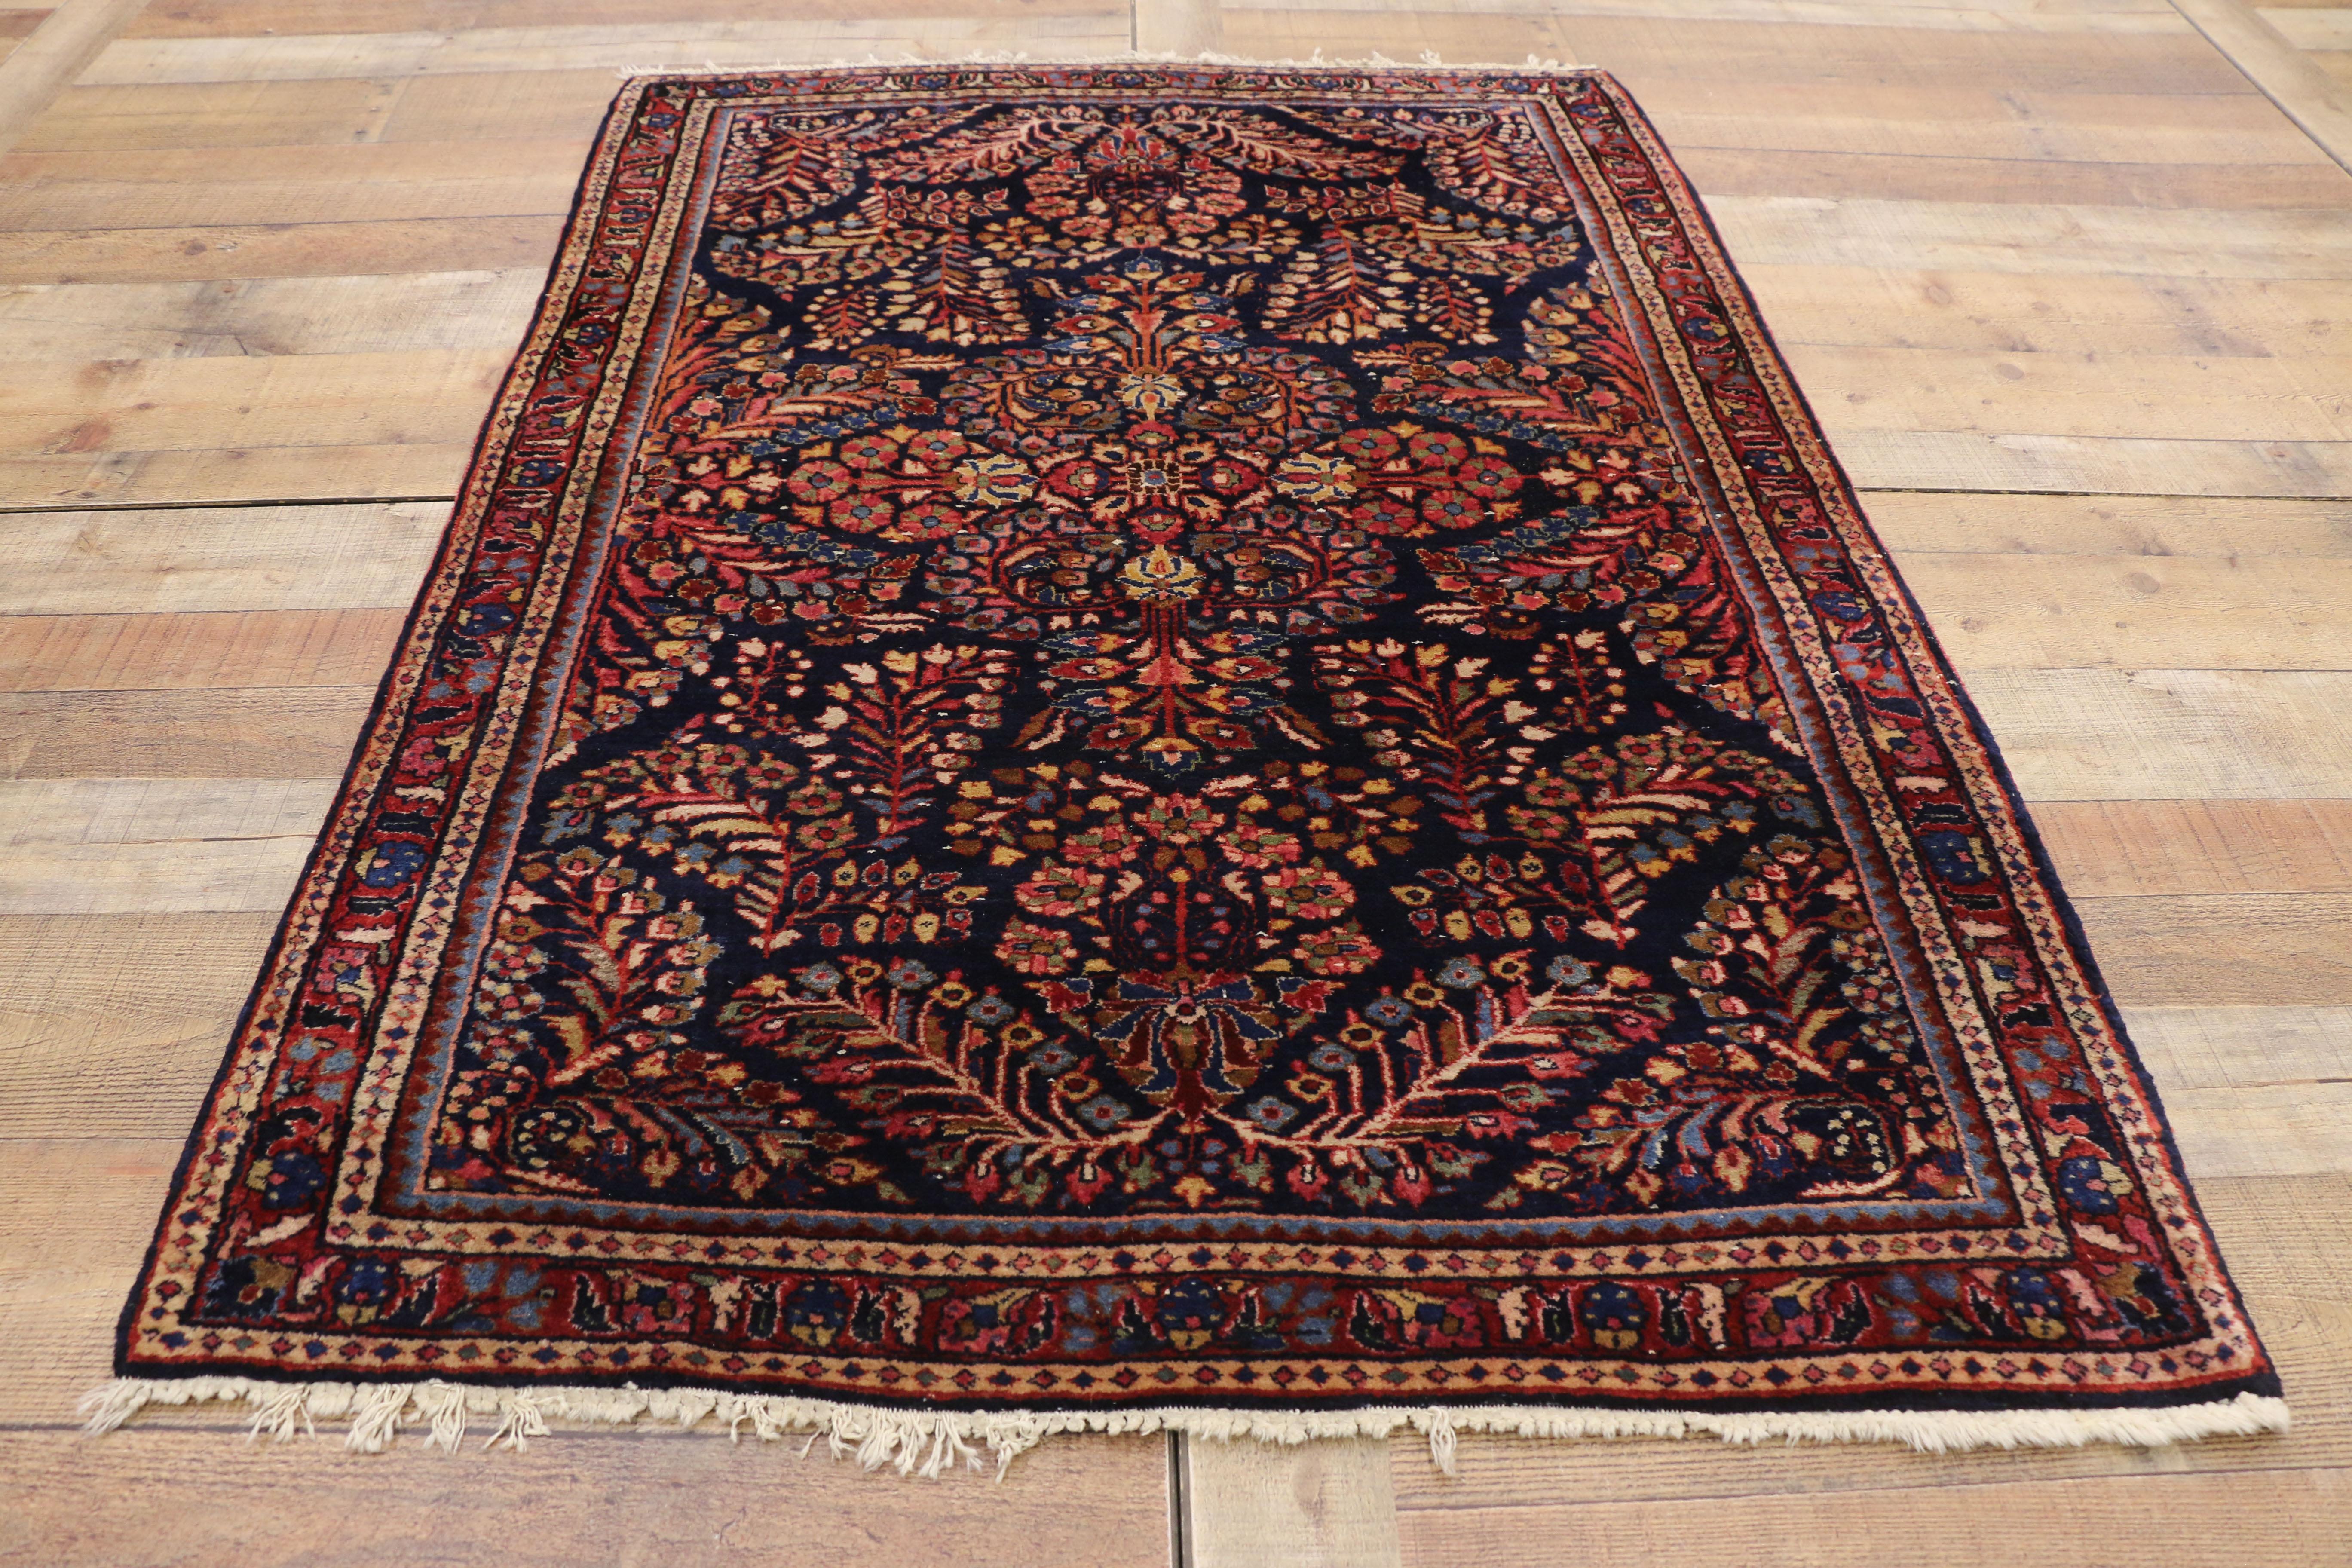 Wool Antique Persian Sarouk Rug with Luxe Victorian Style, Scatter Rug